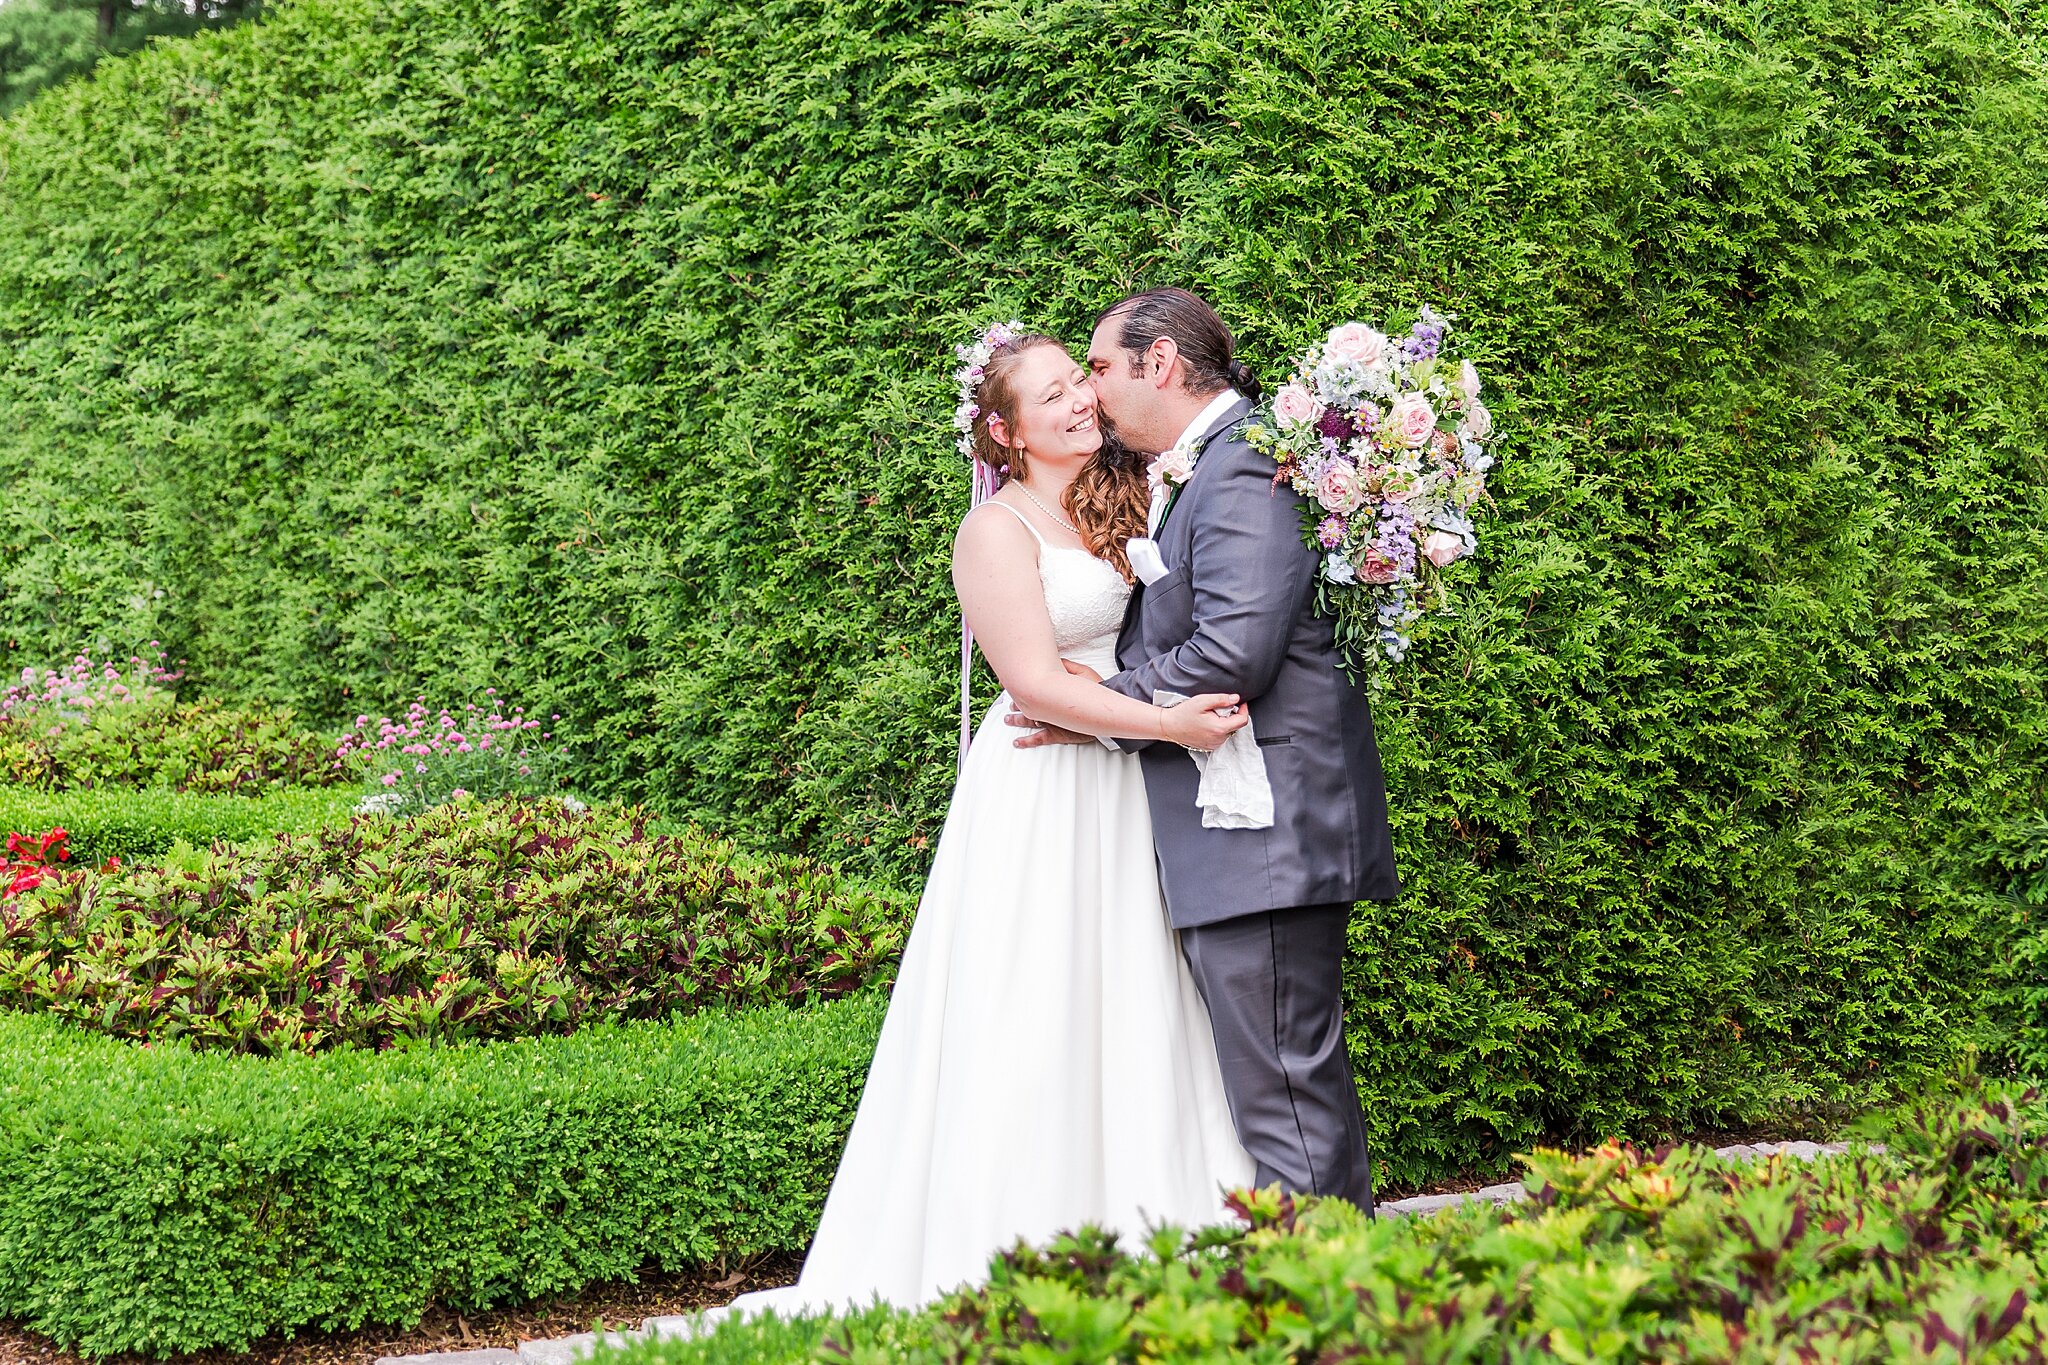 detroit-wedding-photographer-english-garden-inspired-wedding-photos-at-taylor-conservatory-and-botanical-gardens-in-taylor-mi-by-courtney-carolyn-photography_0045.jpg